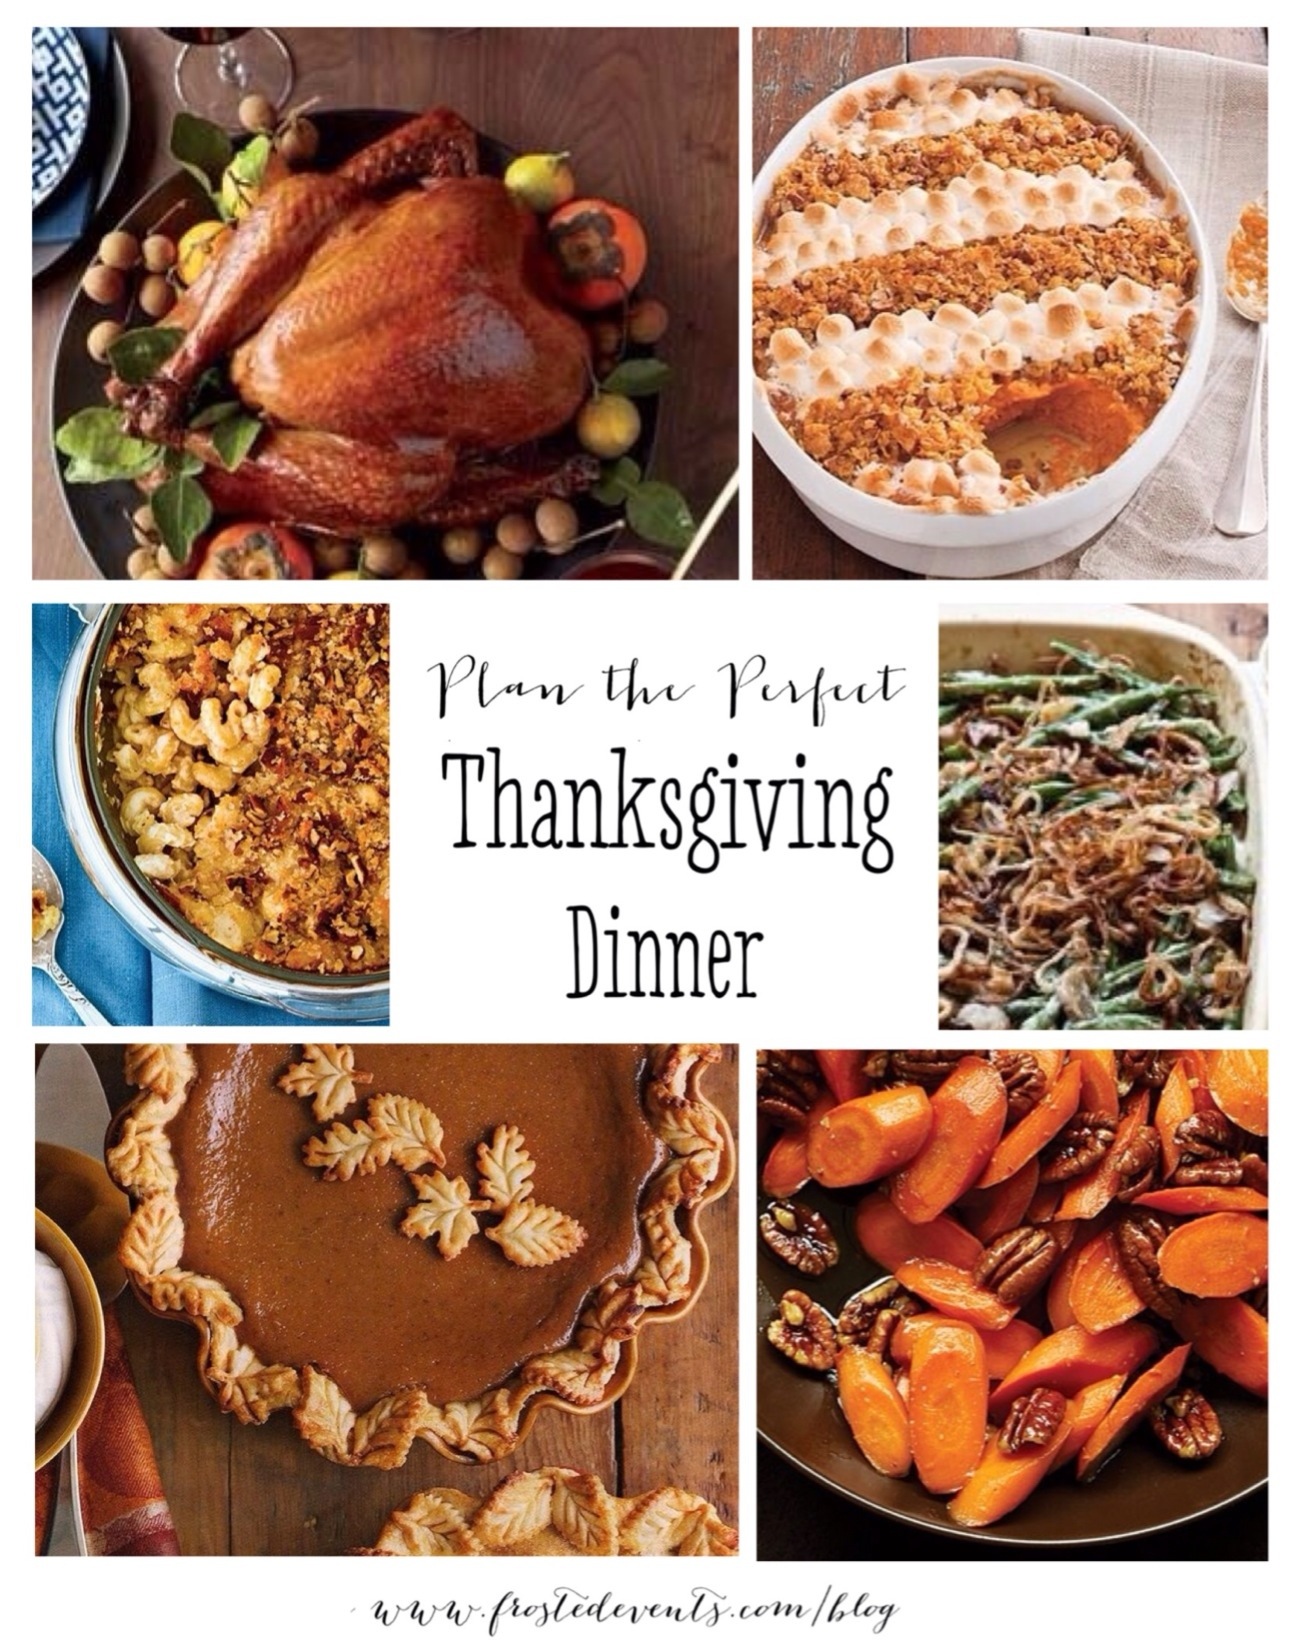 Thanksgiving- Plan the Perfect Thanksgiving Dinner www.frostedevents.com Thanksgiving Menu Planner